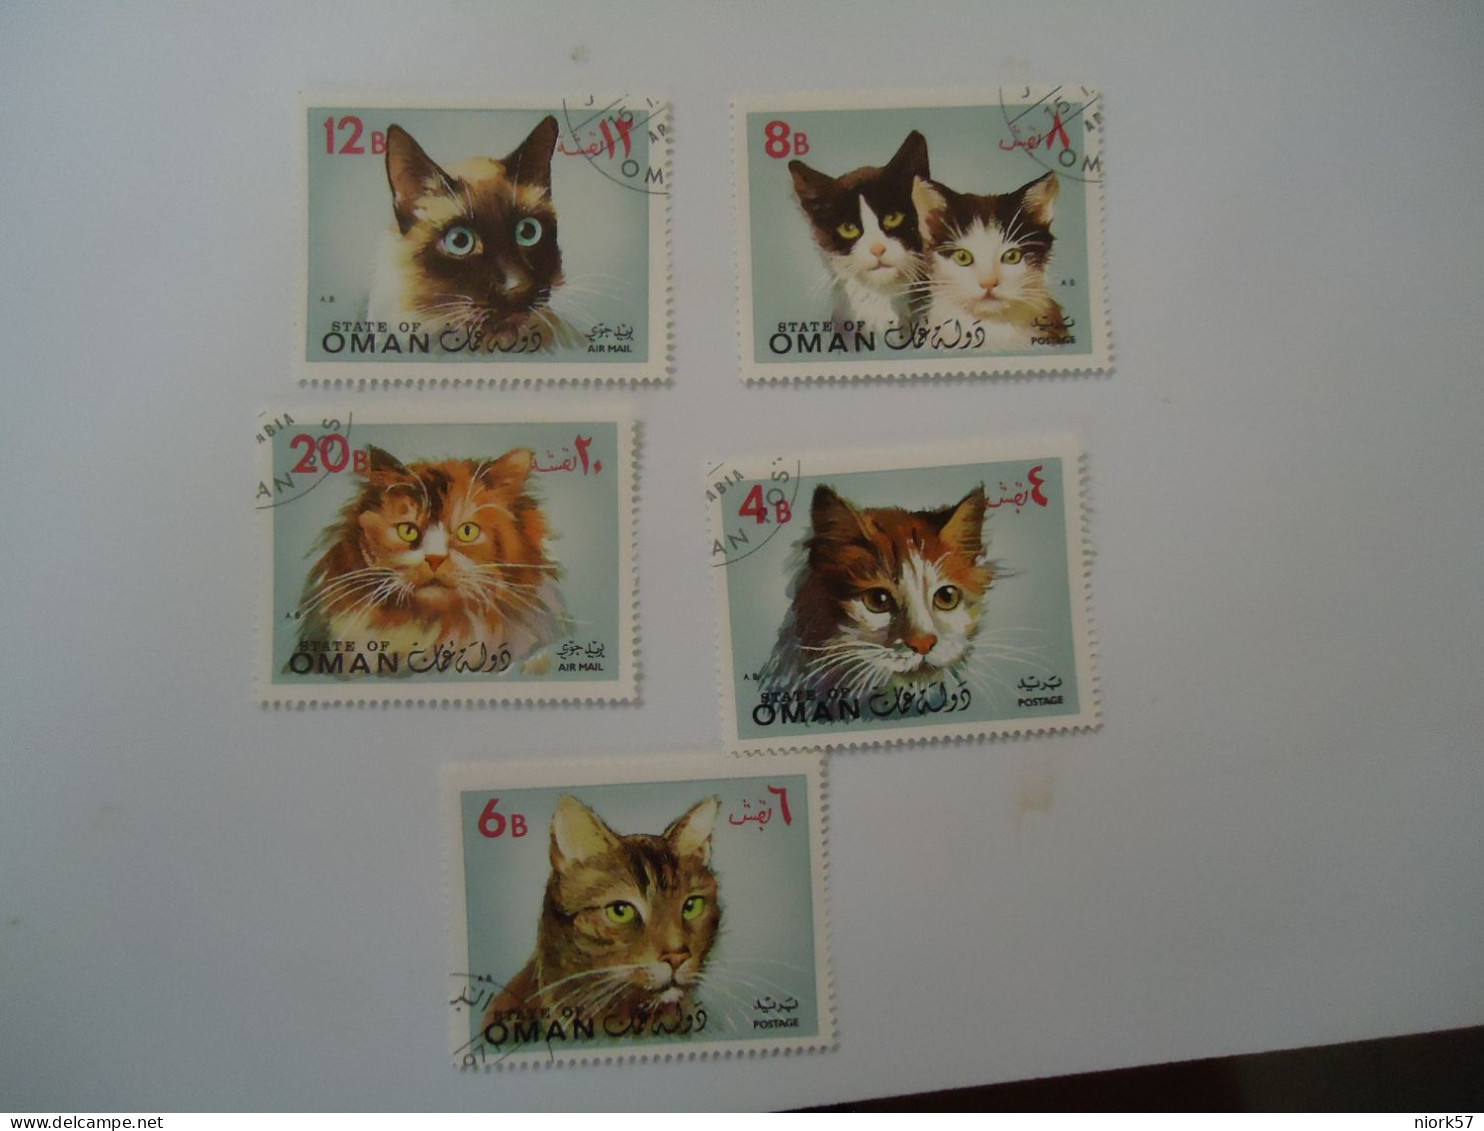 OMAN STATE  USED    SET 5 CATS - Chats Domestiques